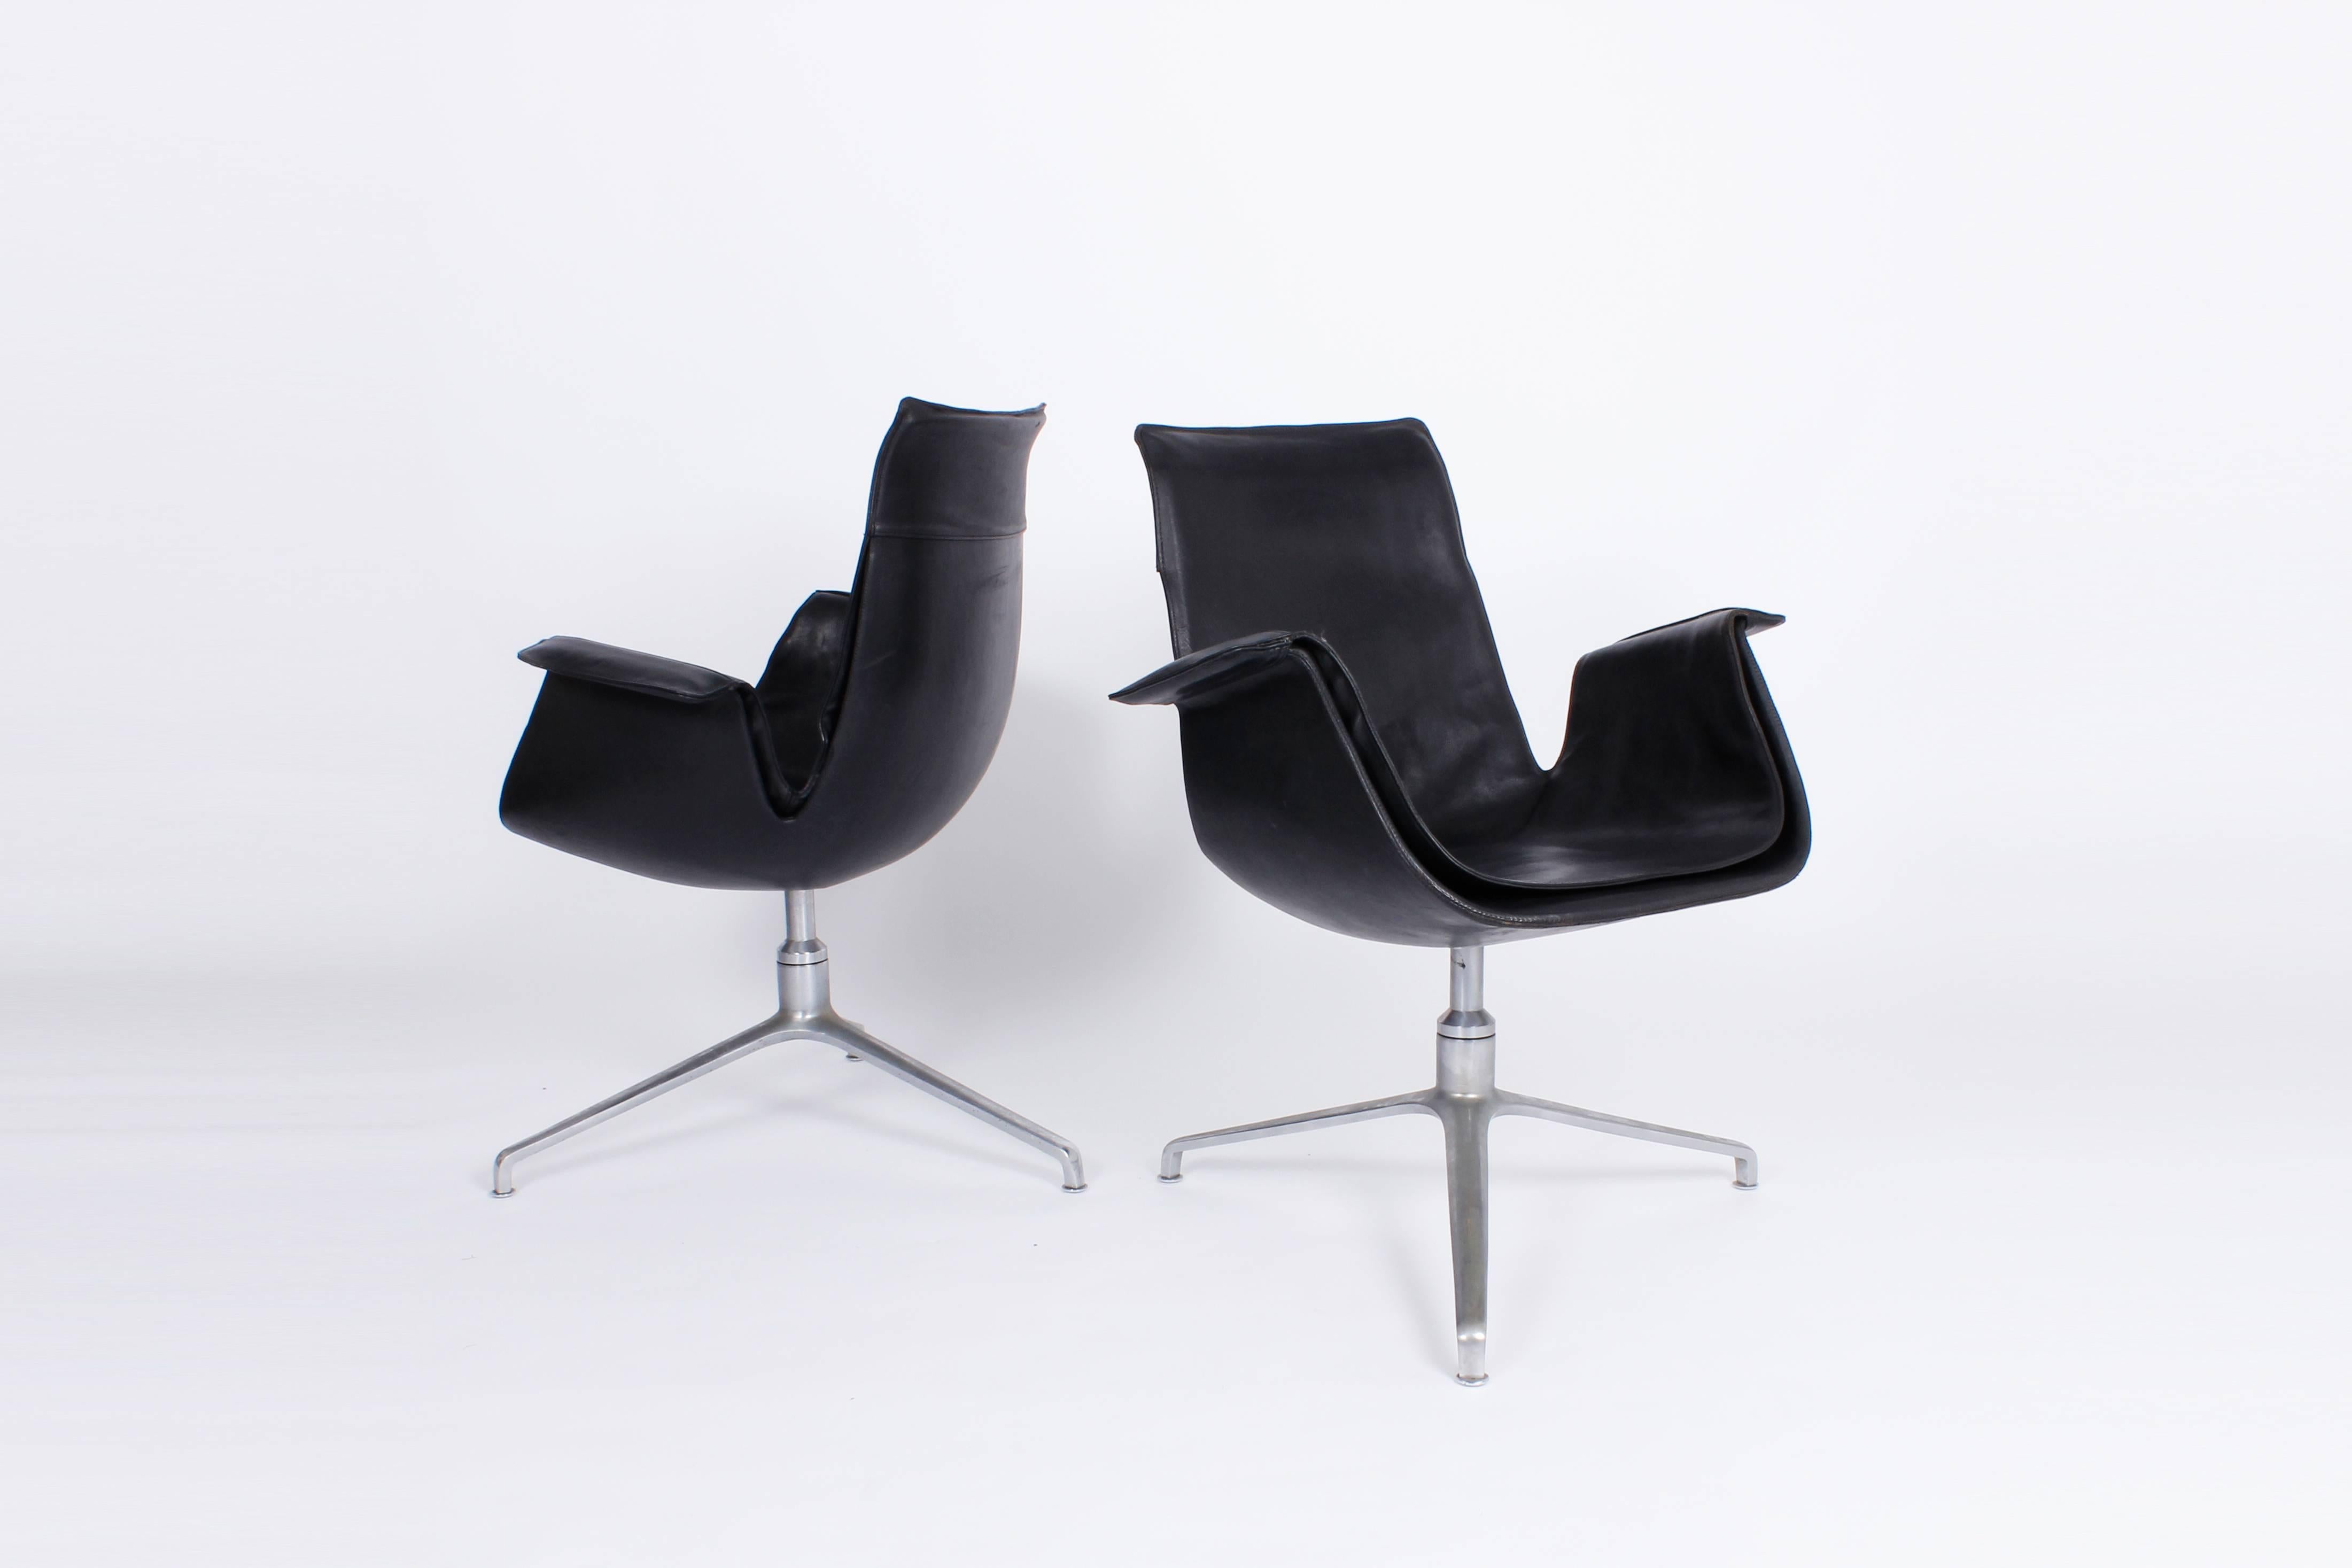 Pair of swivel Bird chairs by Preben Fabricius & Jørgen Kastholm, for Alfred Kill International (Germany).
Black leather and cast aluminum.